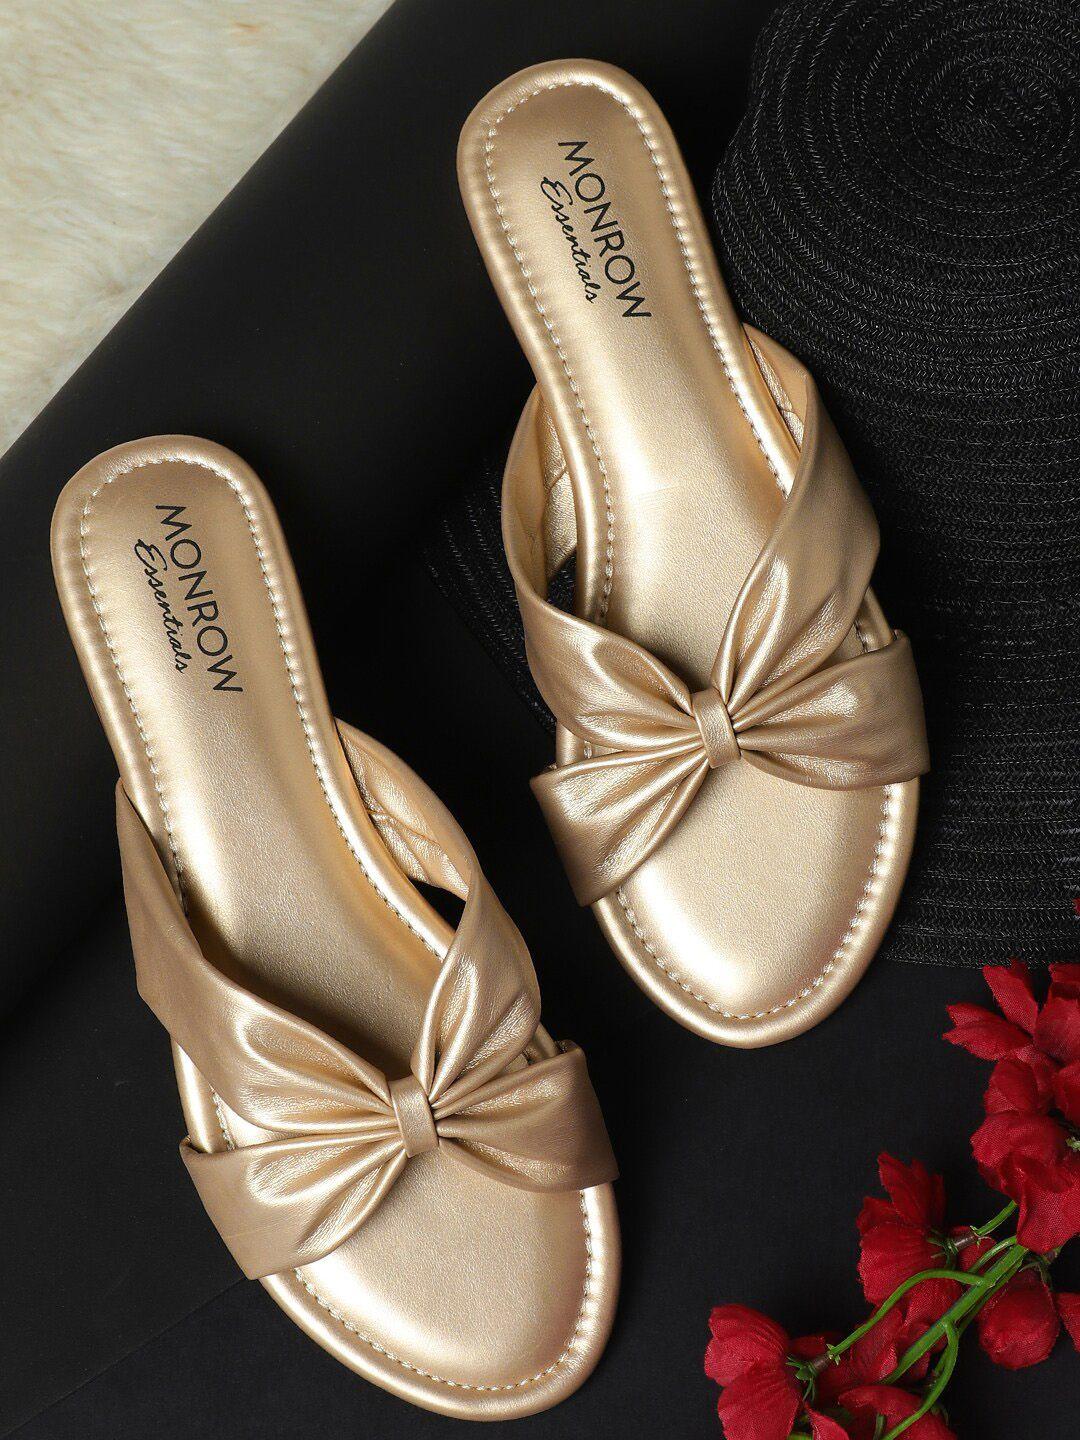 Monrow Women Gold-Toned Ethnic Open Toe Flats with Bows